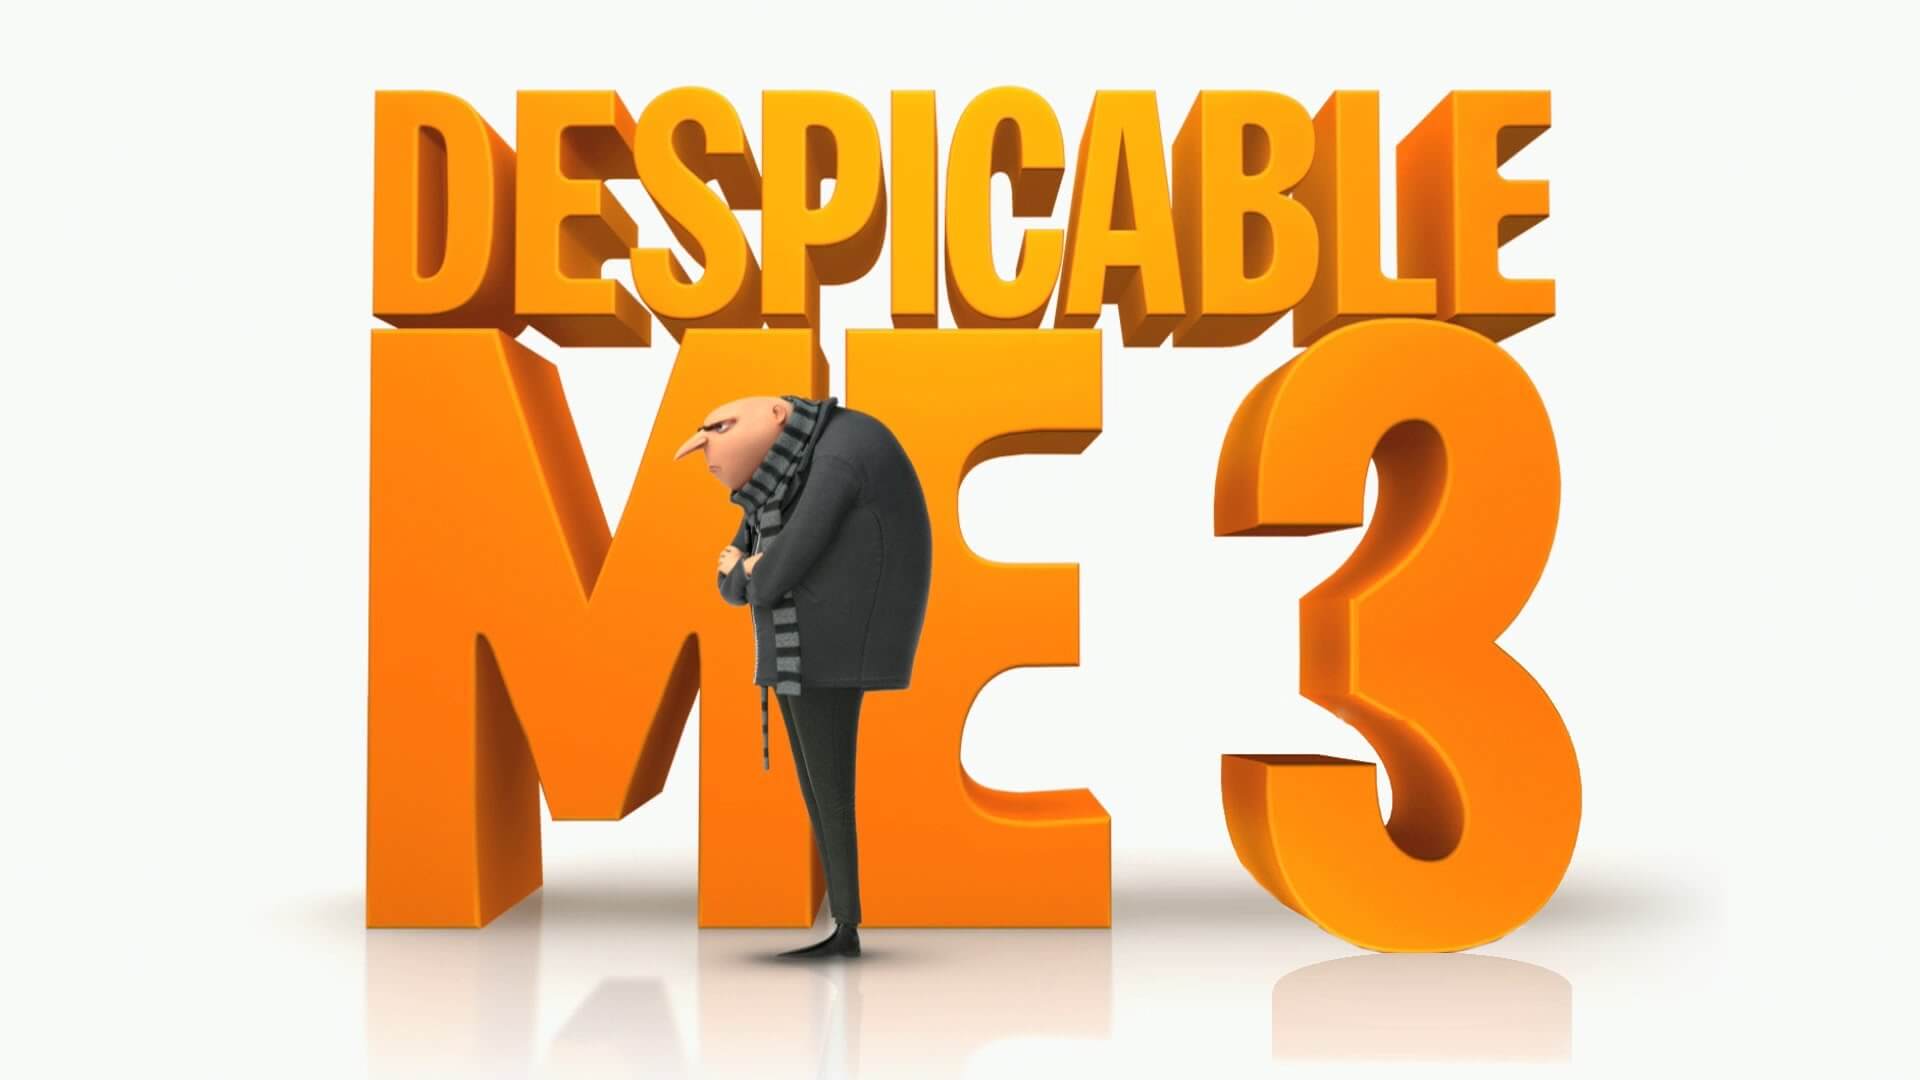 [CLOSED] Win 'DESPICABLE ME 3' Tickets &  Collectibles!